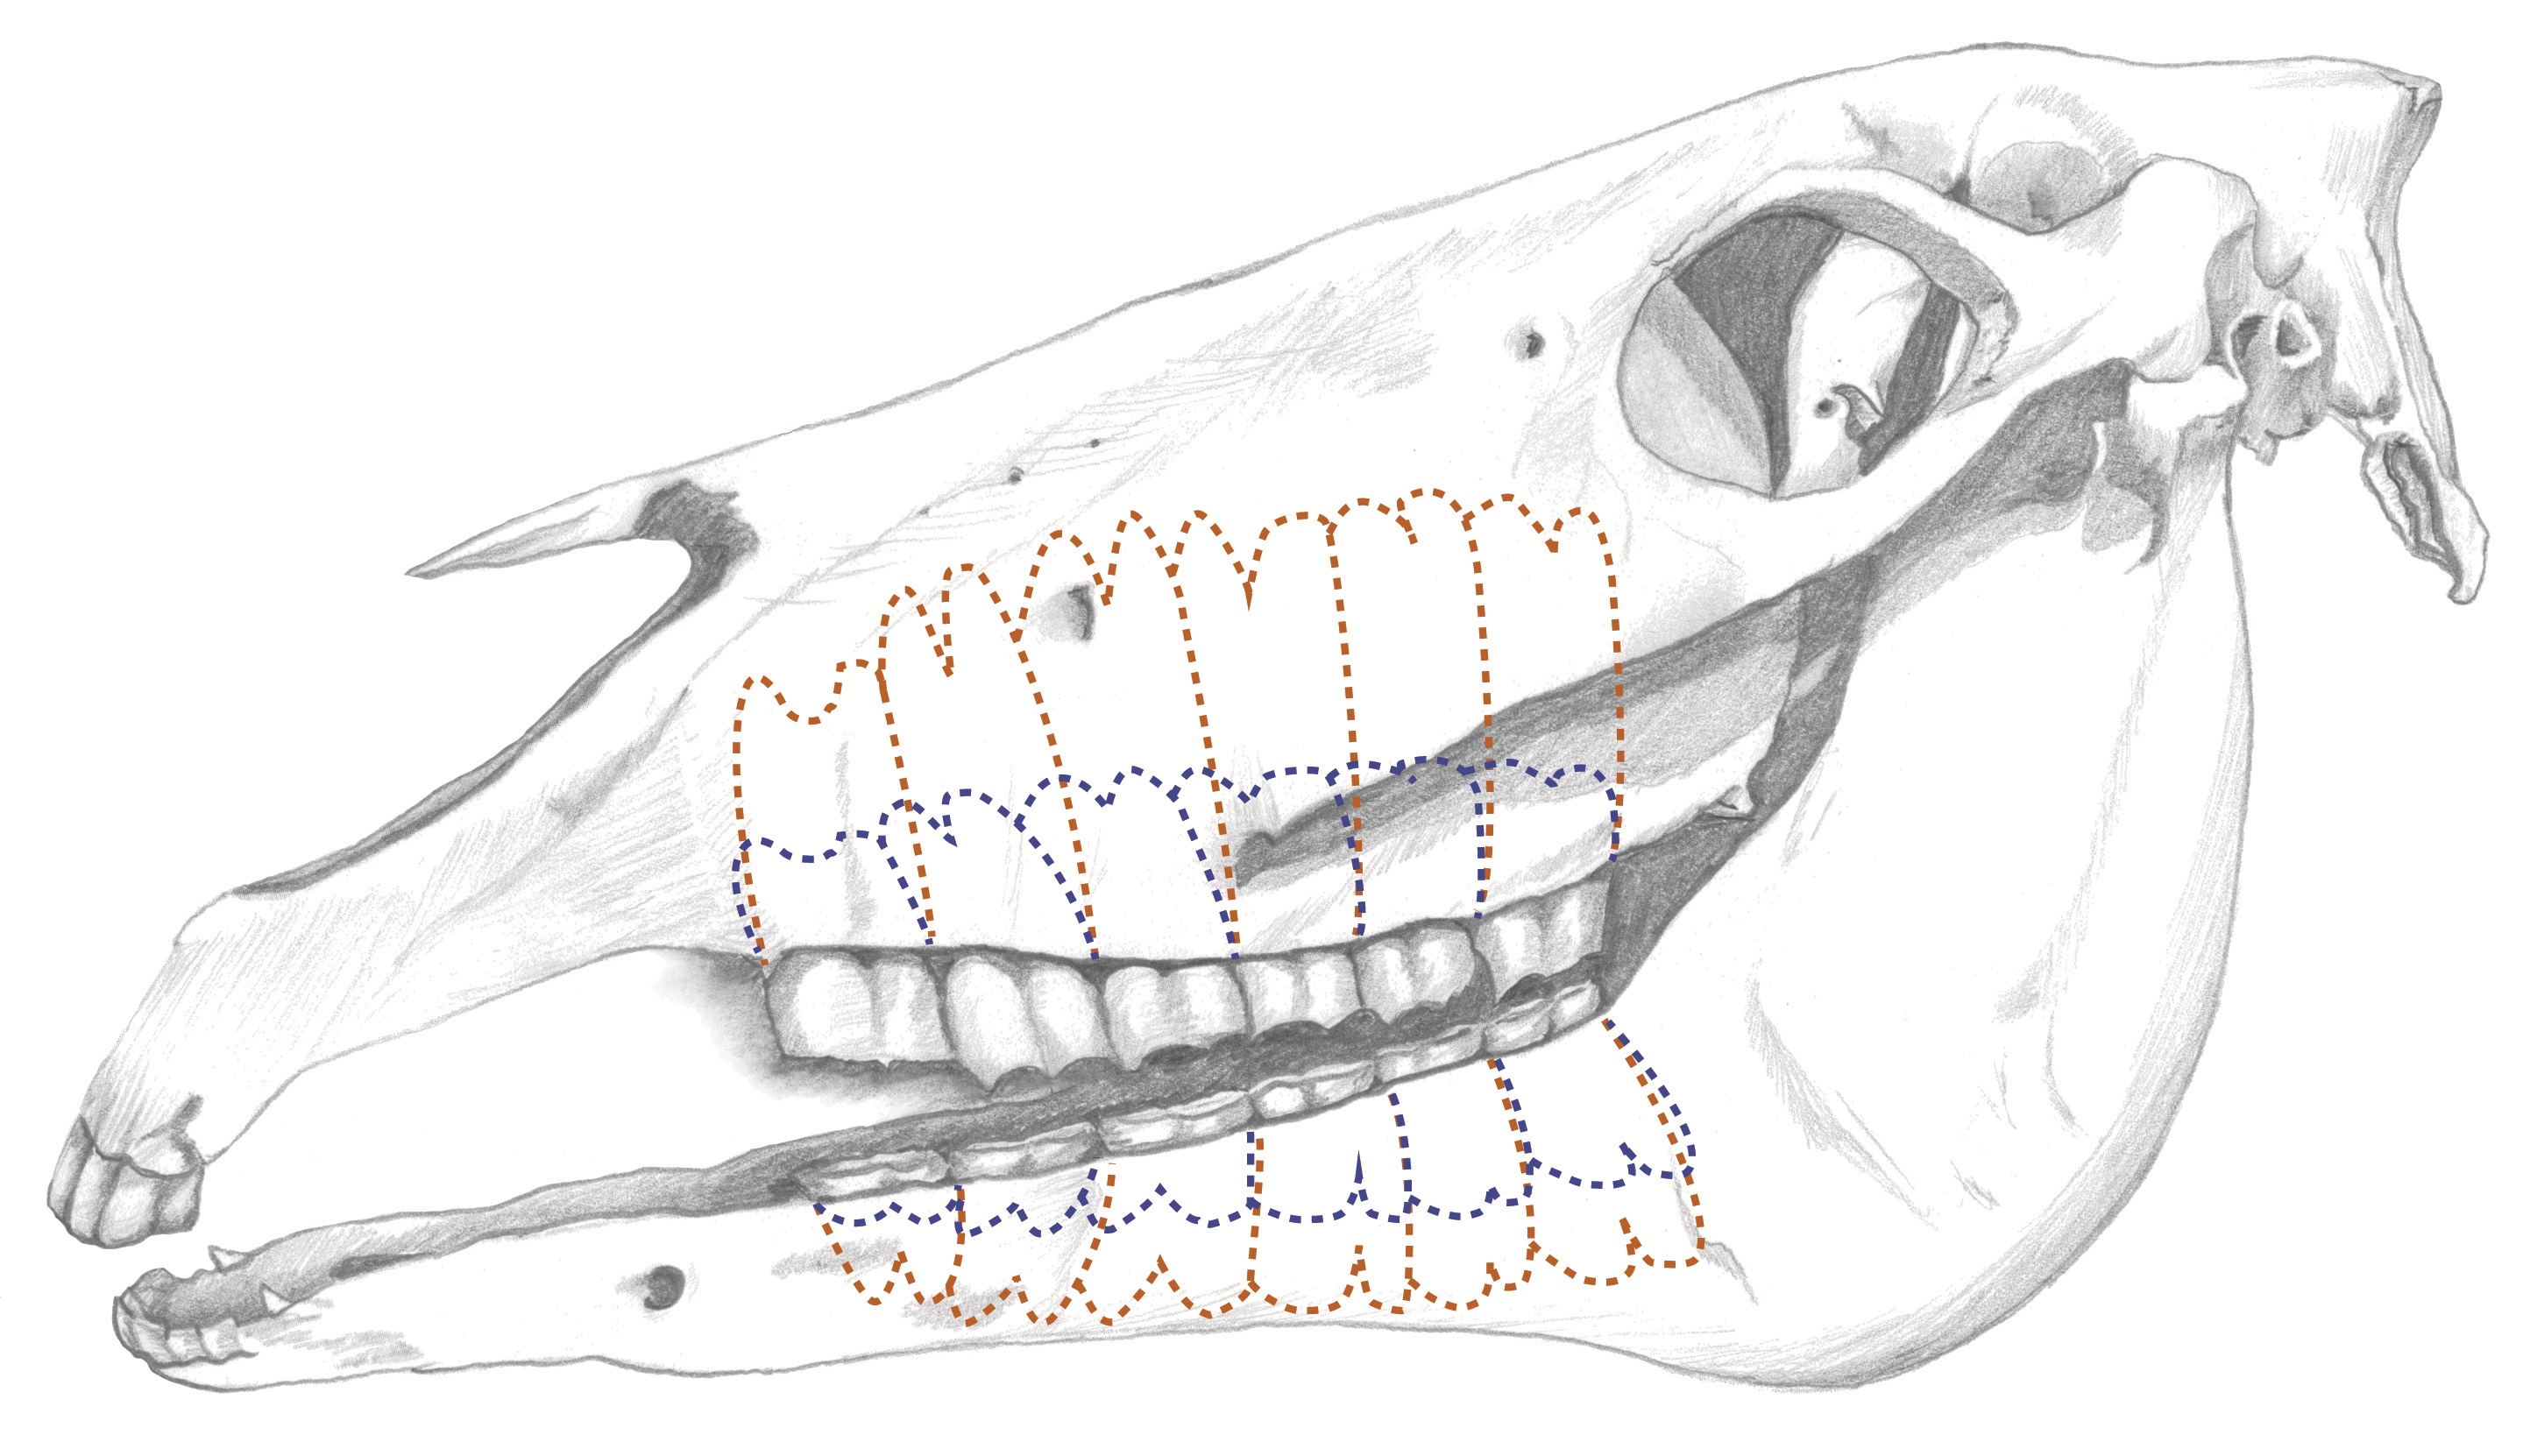 This illustration shows the change in root length of the tooth of the horse as it ages.